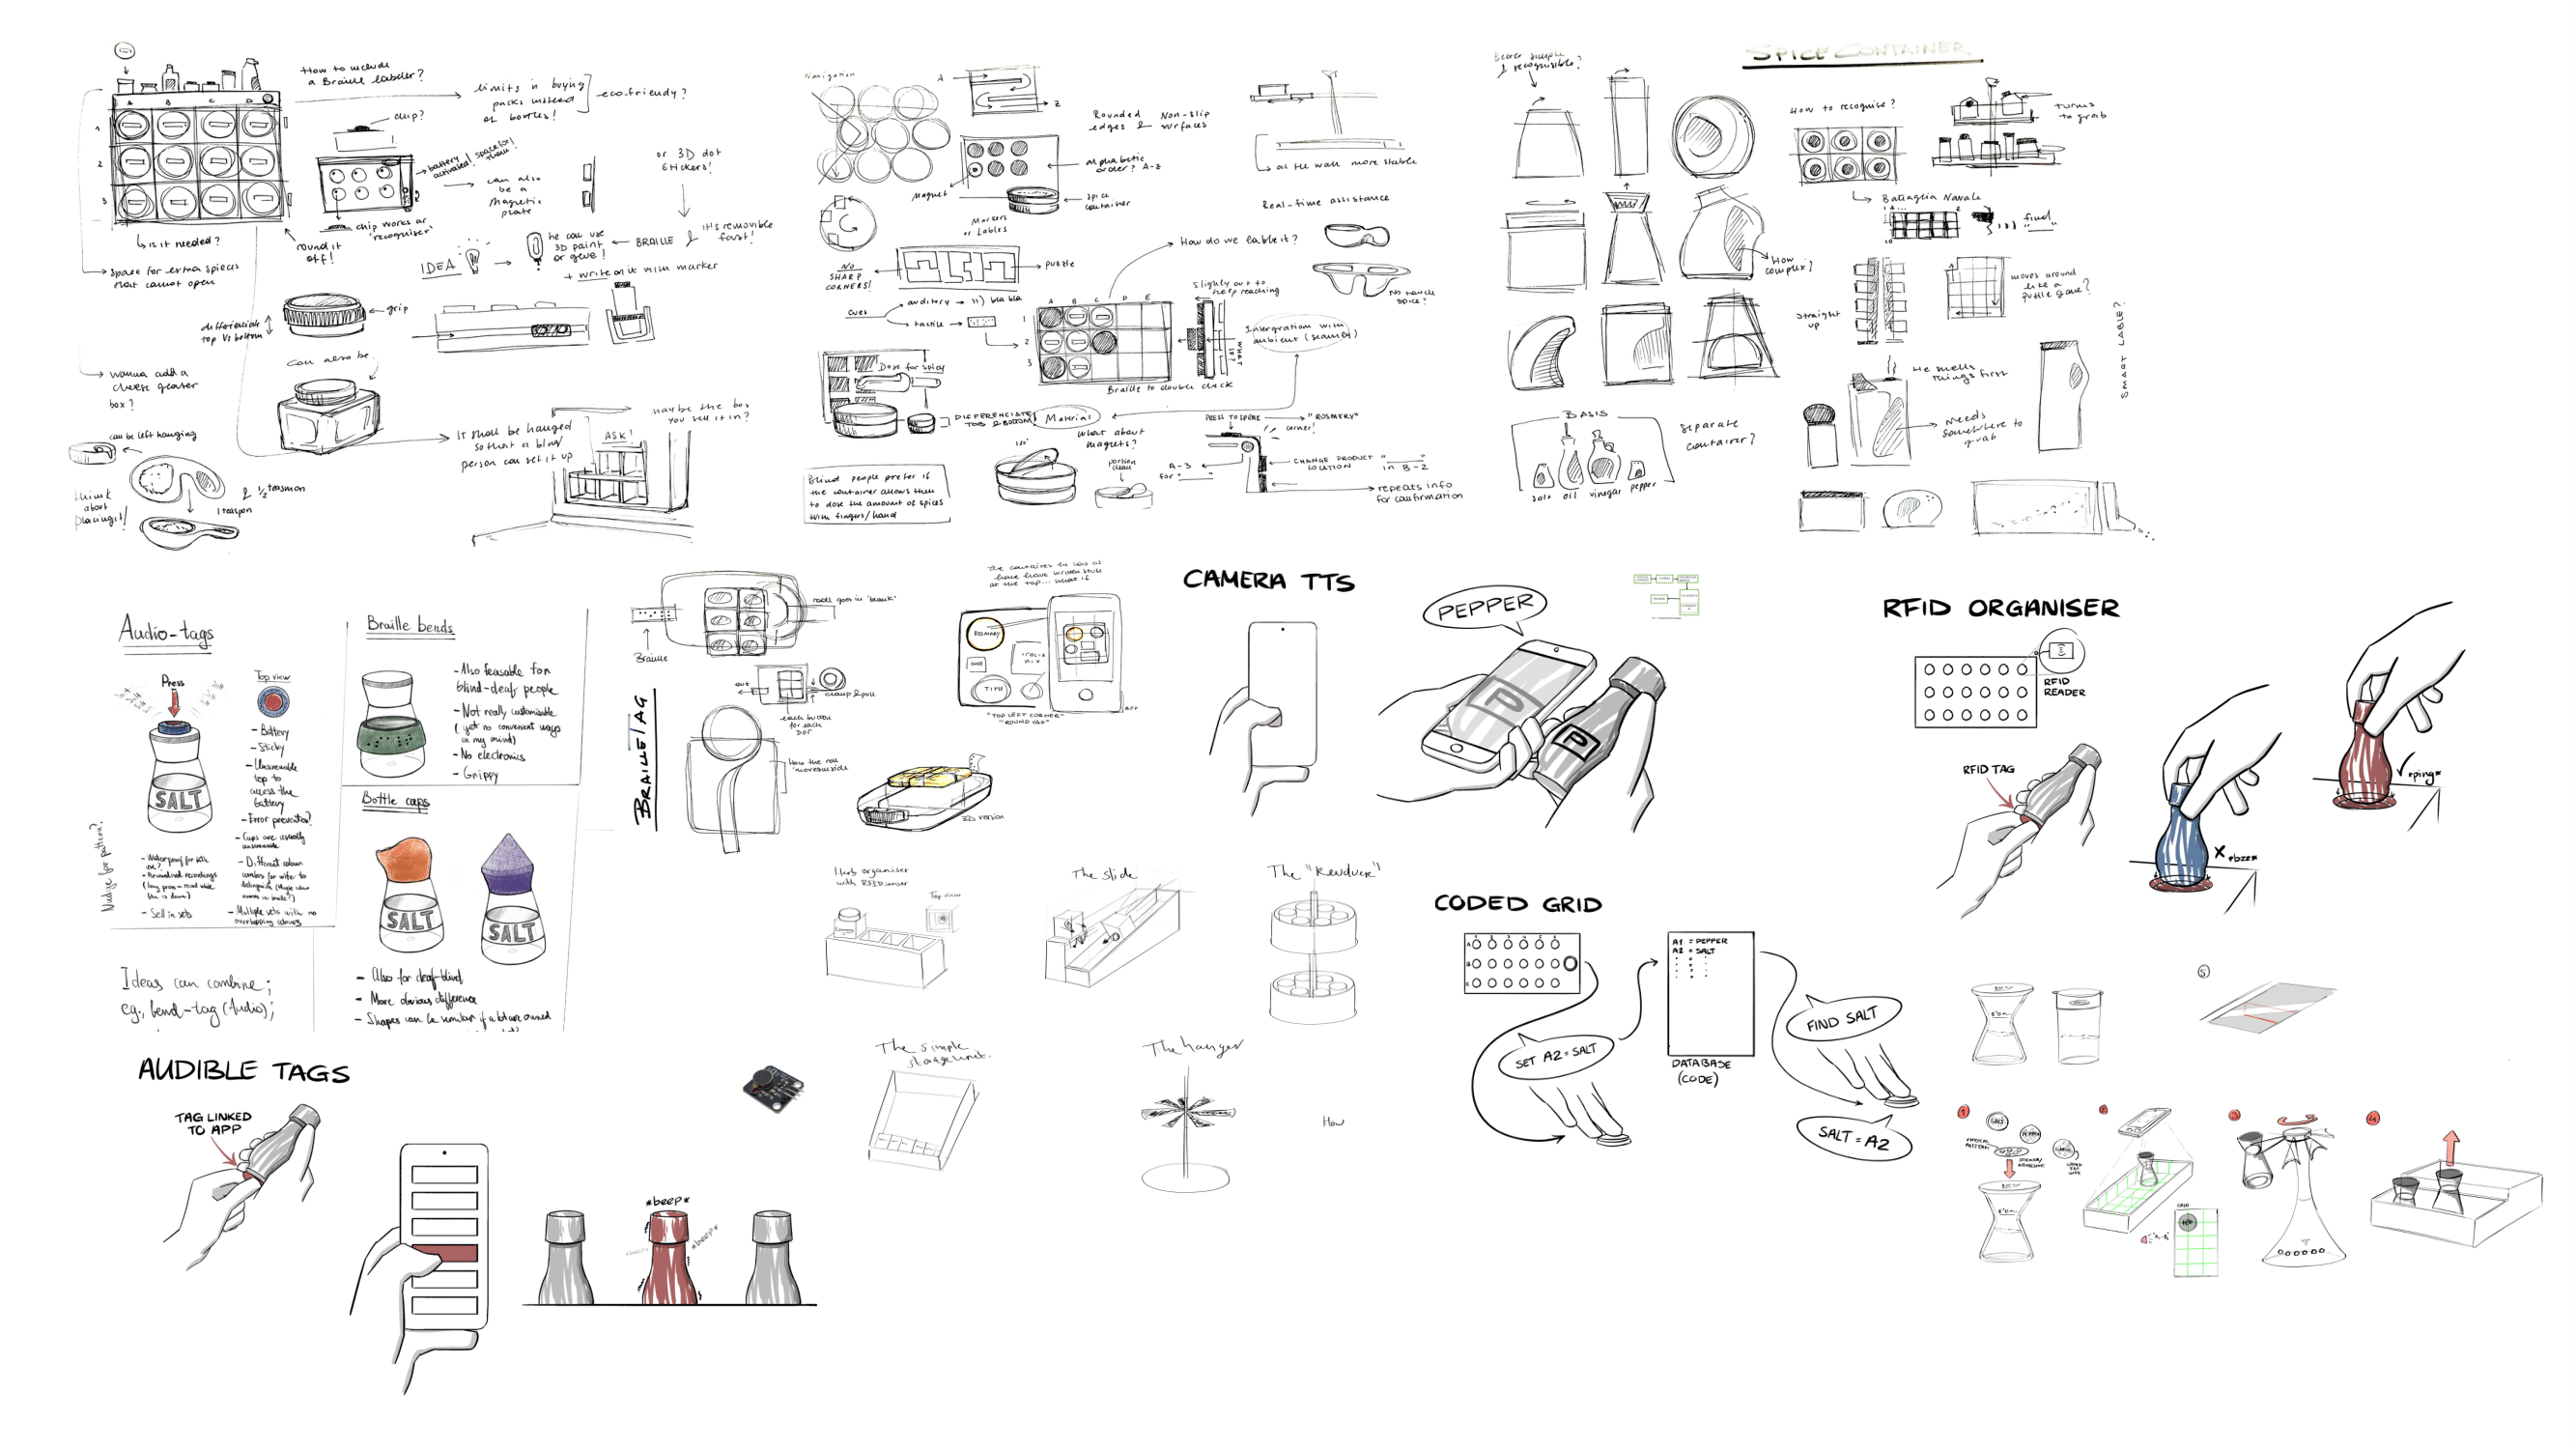 Collage of all low-fidelity ideation sketches